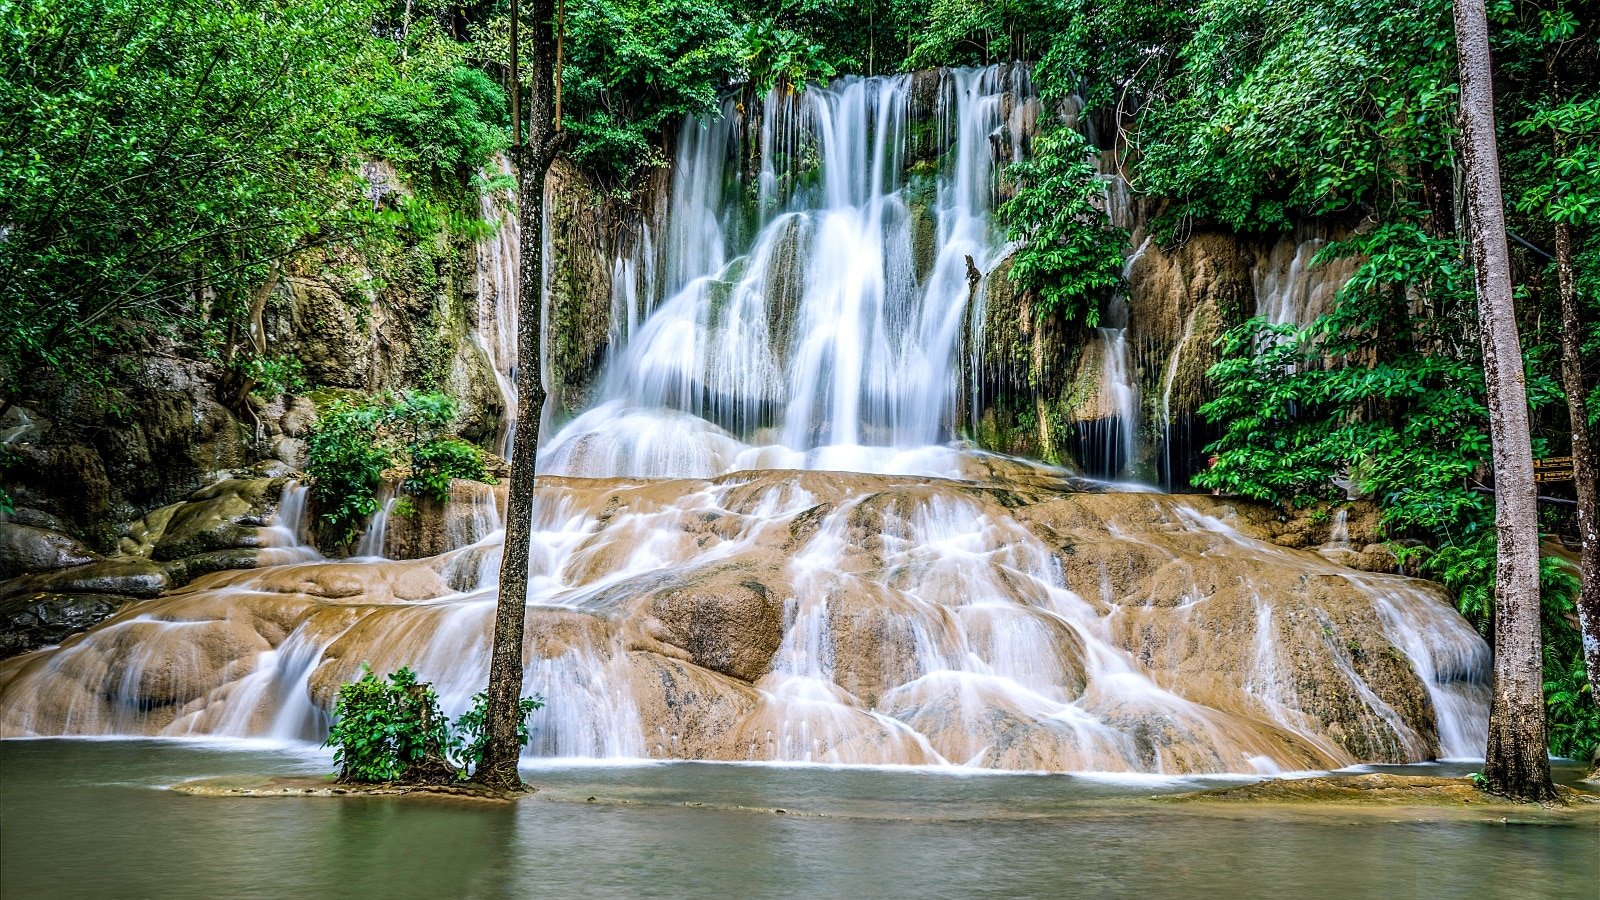 <p><span>Explore Sai Yok National Park, a haven of natural beauty and historical significance. The park’s landscape is dotted with stunning waterfalls, including the renowned Sai Yok Yai, which flows into the Kwai Noi River. The park’s rich biodiversity and historical sites, such as remnants of the Death Railway, offer a diverse experience.</span></p> <p><span>Choose adventures in river rafting, wildlife spotting, or a peaceful nature retreat; Sai Yok National Park caters to all. The park’s serene environment and history make it a unique and enriching destination in Kanchanaburi.</span></p> <p><b>Insider’s Tip: </b><span>Rent a raft house on the river for an overnight stay to fully immerse yourself in the natural beauty. </span></p> <p><b>When To Travel: </b><span>The dry season from November to February is ideal for visiting. </span></p> <p><b>How To Get There: </b><span>The park is about a 2-hour drive from Kanchanaburi town. Public transport is limited, so consider renting a car or booking a tour.</span></p>